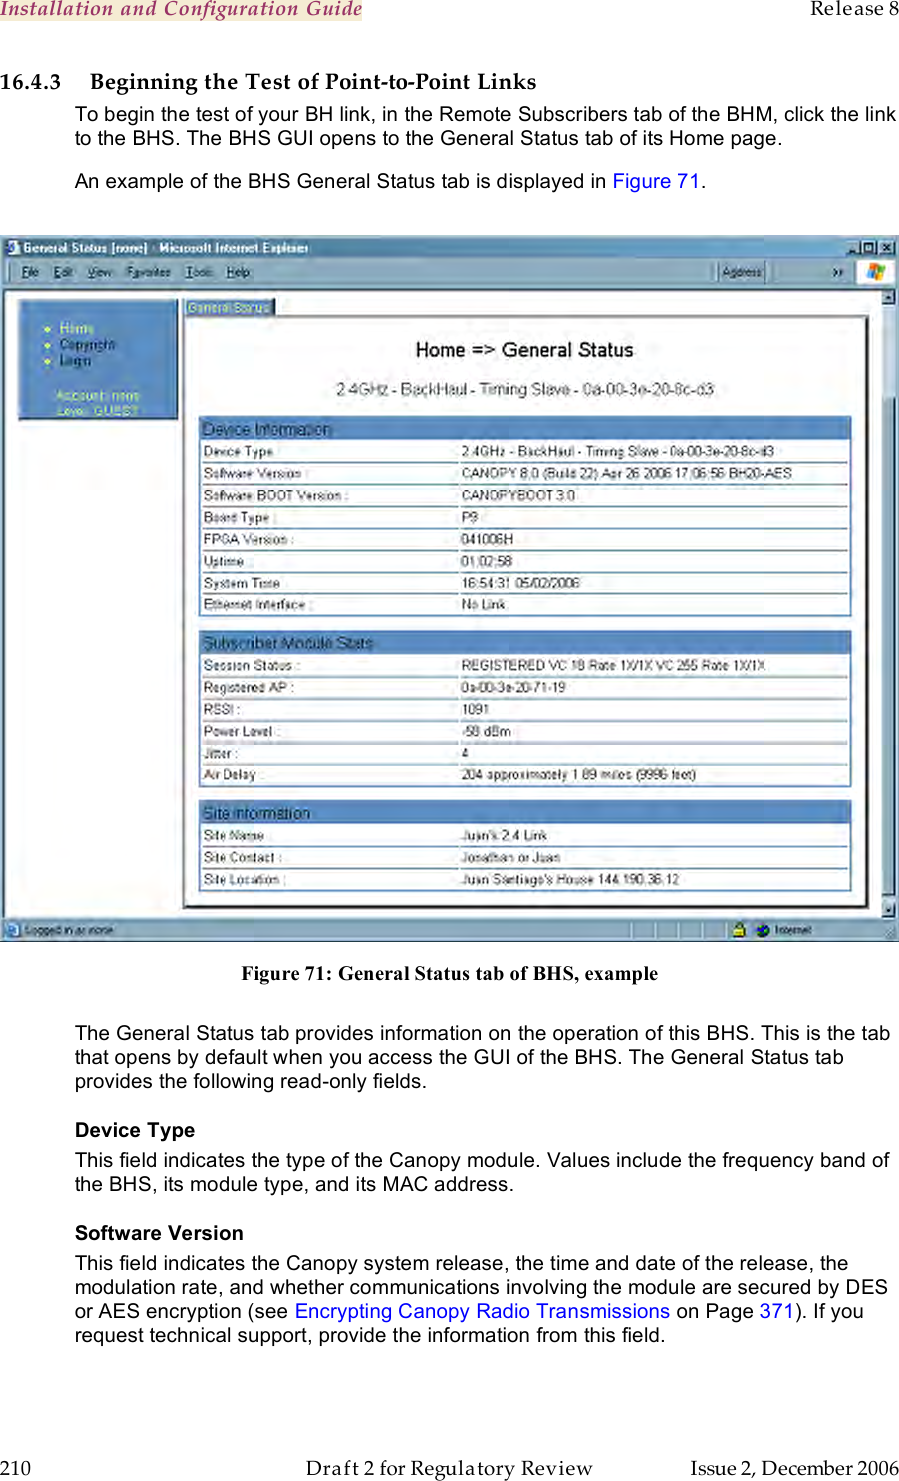 Installation and Configuration Guide    Release 8   210  Draft 2 for Regulatory Review  Issue 2, December 2006 16.4.3 Beginning the Test of Point-to-Point Links To begin the test of your BH link, in the Remote Subscribers tab of the BHM, click the link to the BHS. The BHS GUI opens to the General Status tab of its Home page. An example of the BHS General Status tab is displayed in Figure 71.   Figure 71: General Status tab of BHS, example  The General Status tab provides information on the operation of this BHS. This is the tab that opens by default when you access the GUI of the BHS. The General Status tab provides the following read-only fields. Device Type  This field indicates the type of the Canopy module. Values include the frequency band of the BHS, its module type, and its MAC address. Software Version This field indicates the Canopy system release, the time and date of the release, the modulation rate, and whether communications involving the module are secured by DES or AES encryption (see Encrypting Canopy Radio Transmissions on Page 371). If you request technical support, provide the information from this field. 